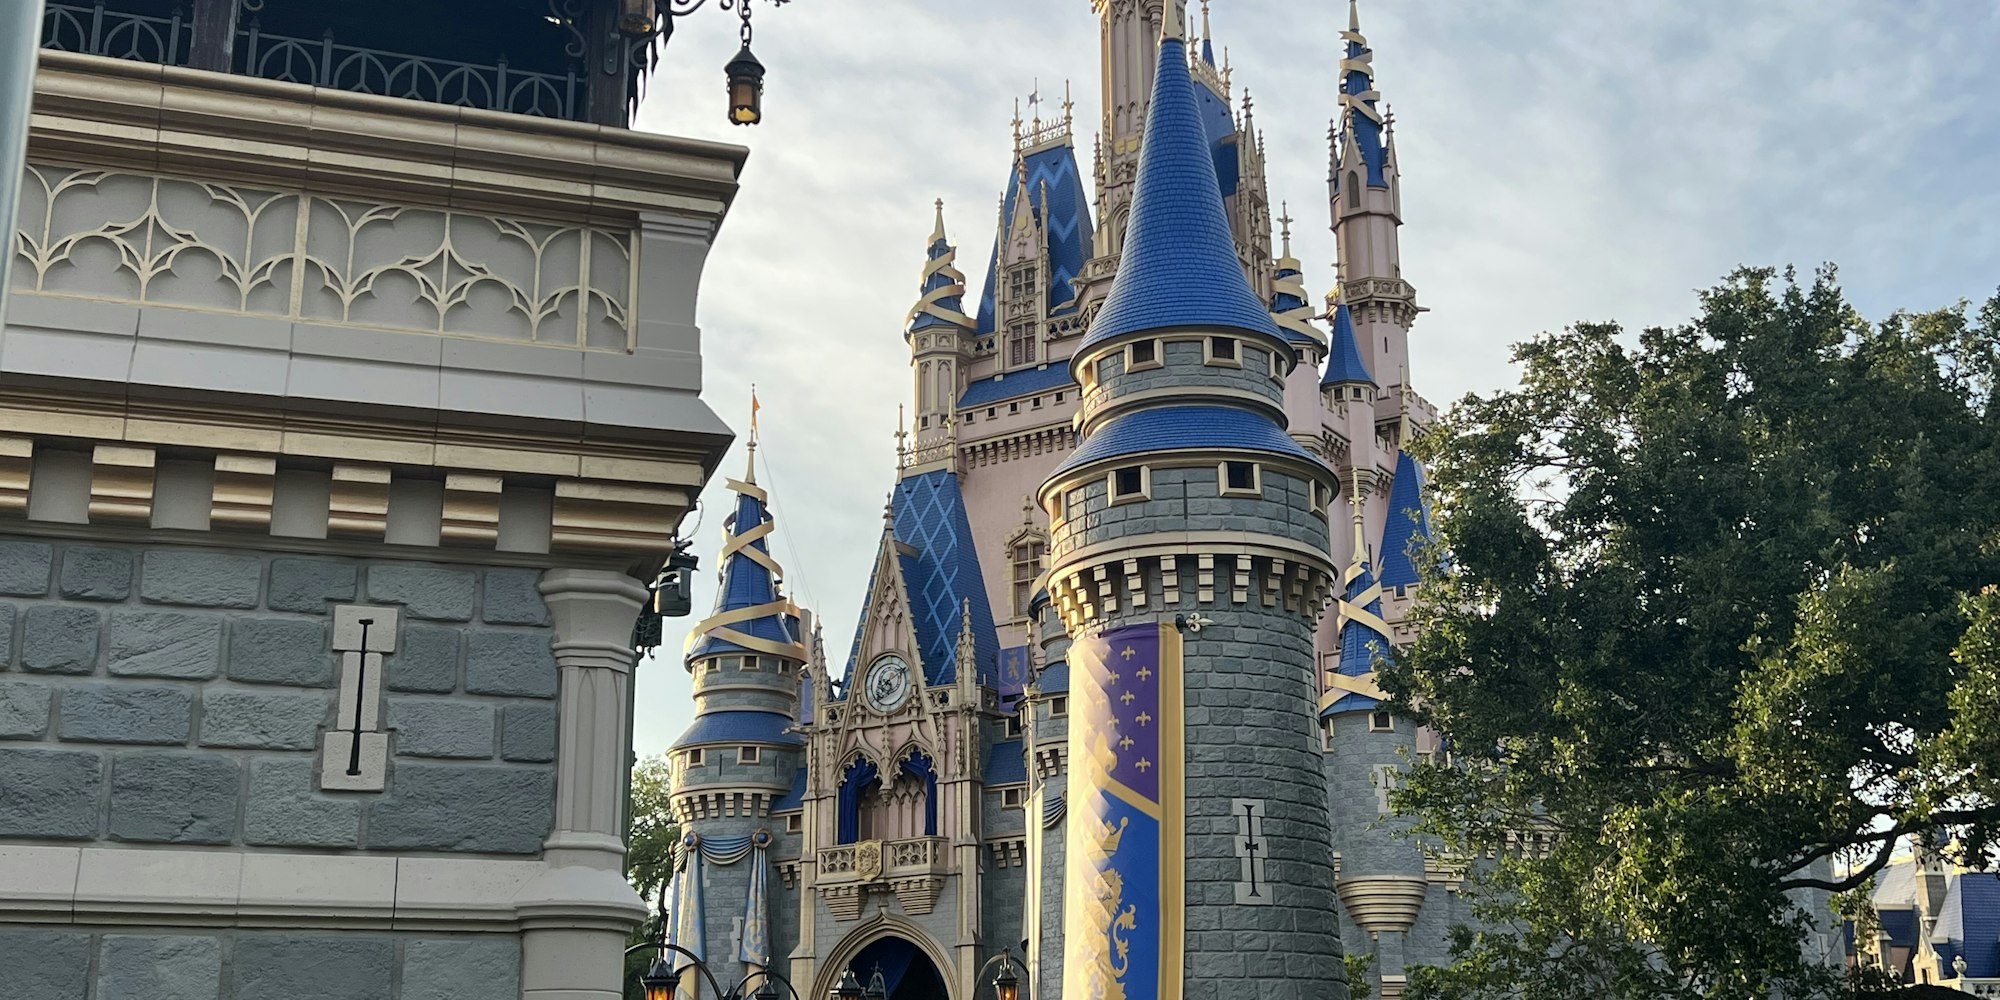 Cover Image for How to Make the Most of One Day at Disney World